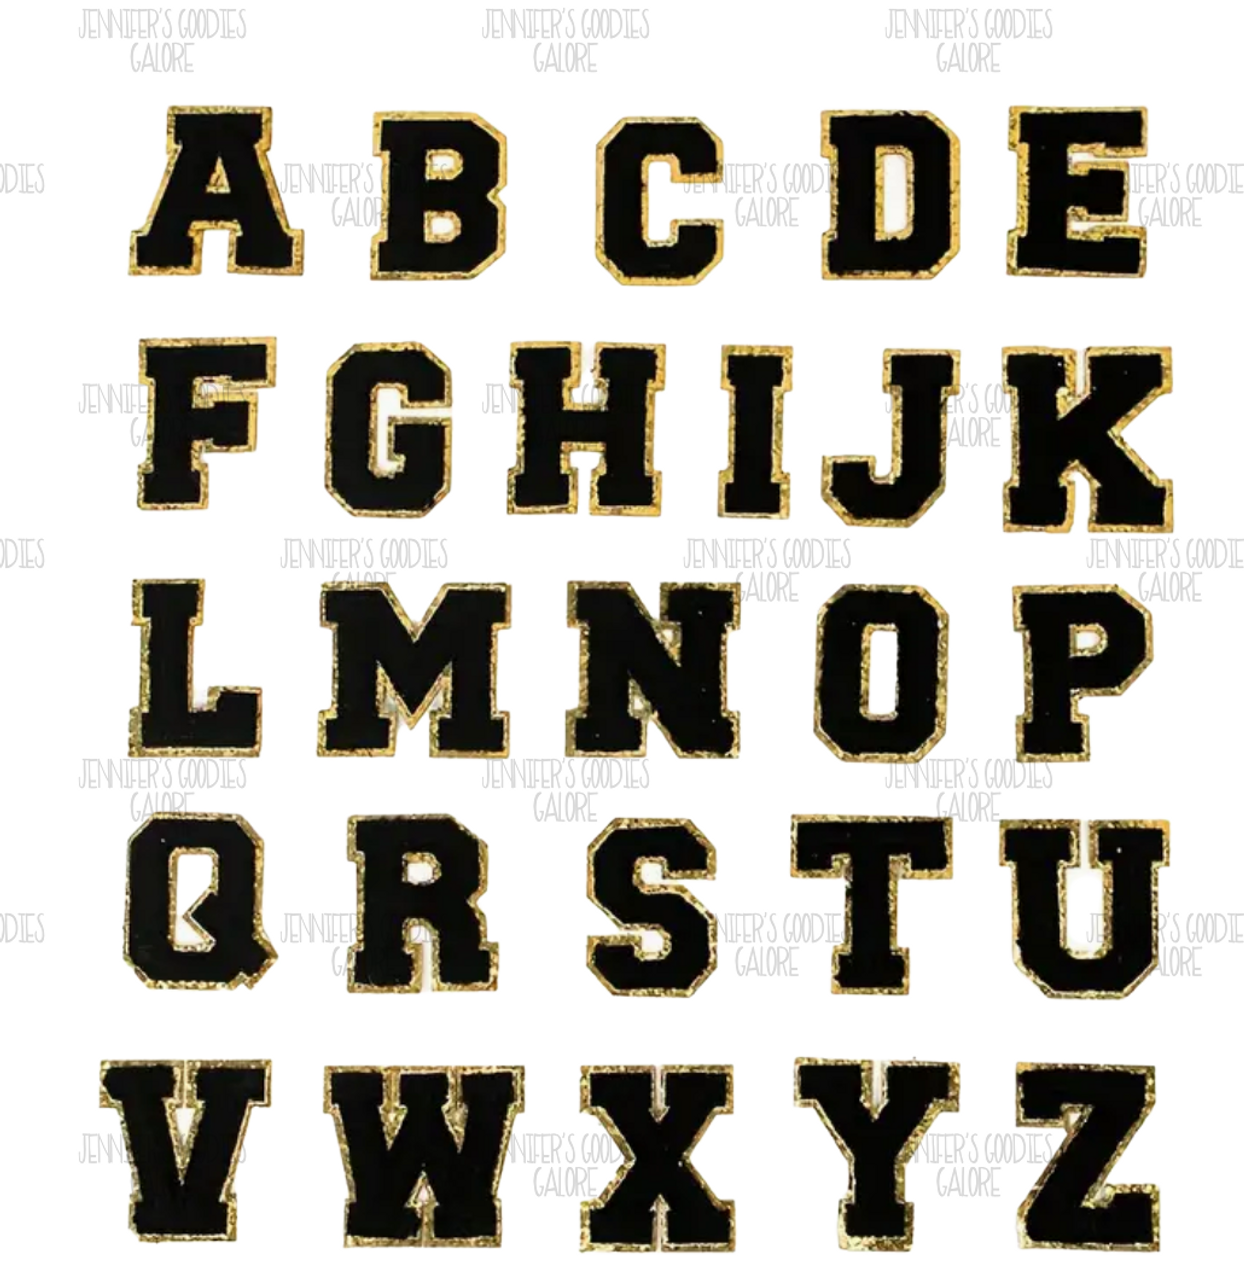 5.5cm, Self-Adhesive Iron On Letters: Chenille Patches, Varsity Letters,  Gold Glitter, GREEN Letter Patches Stickers for Clothing, Jackets,  Backpacks, Hats Repair & Alphabet Embroidered Applique Preppy Patch, 1  PIECE - Jennifer's Goodies